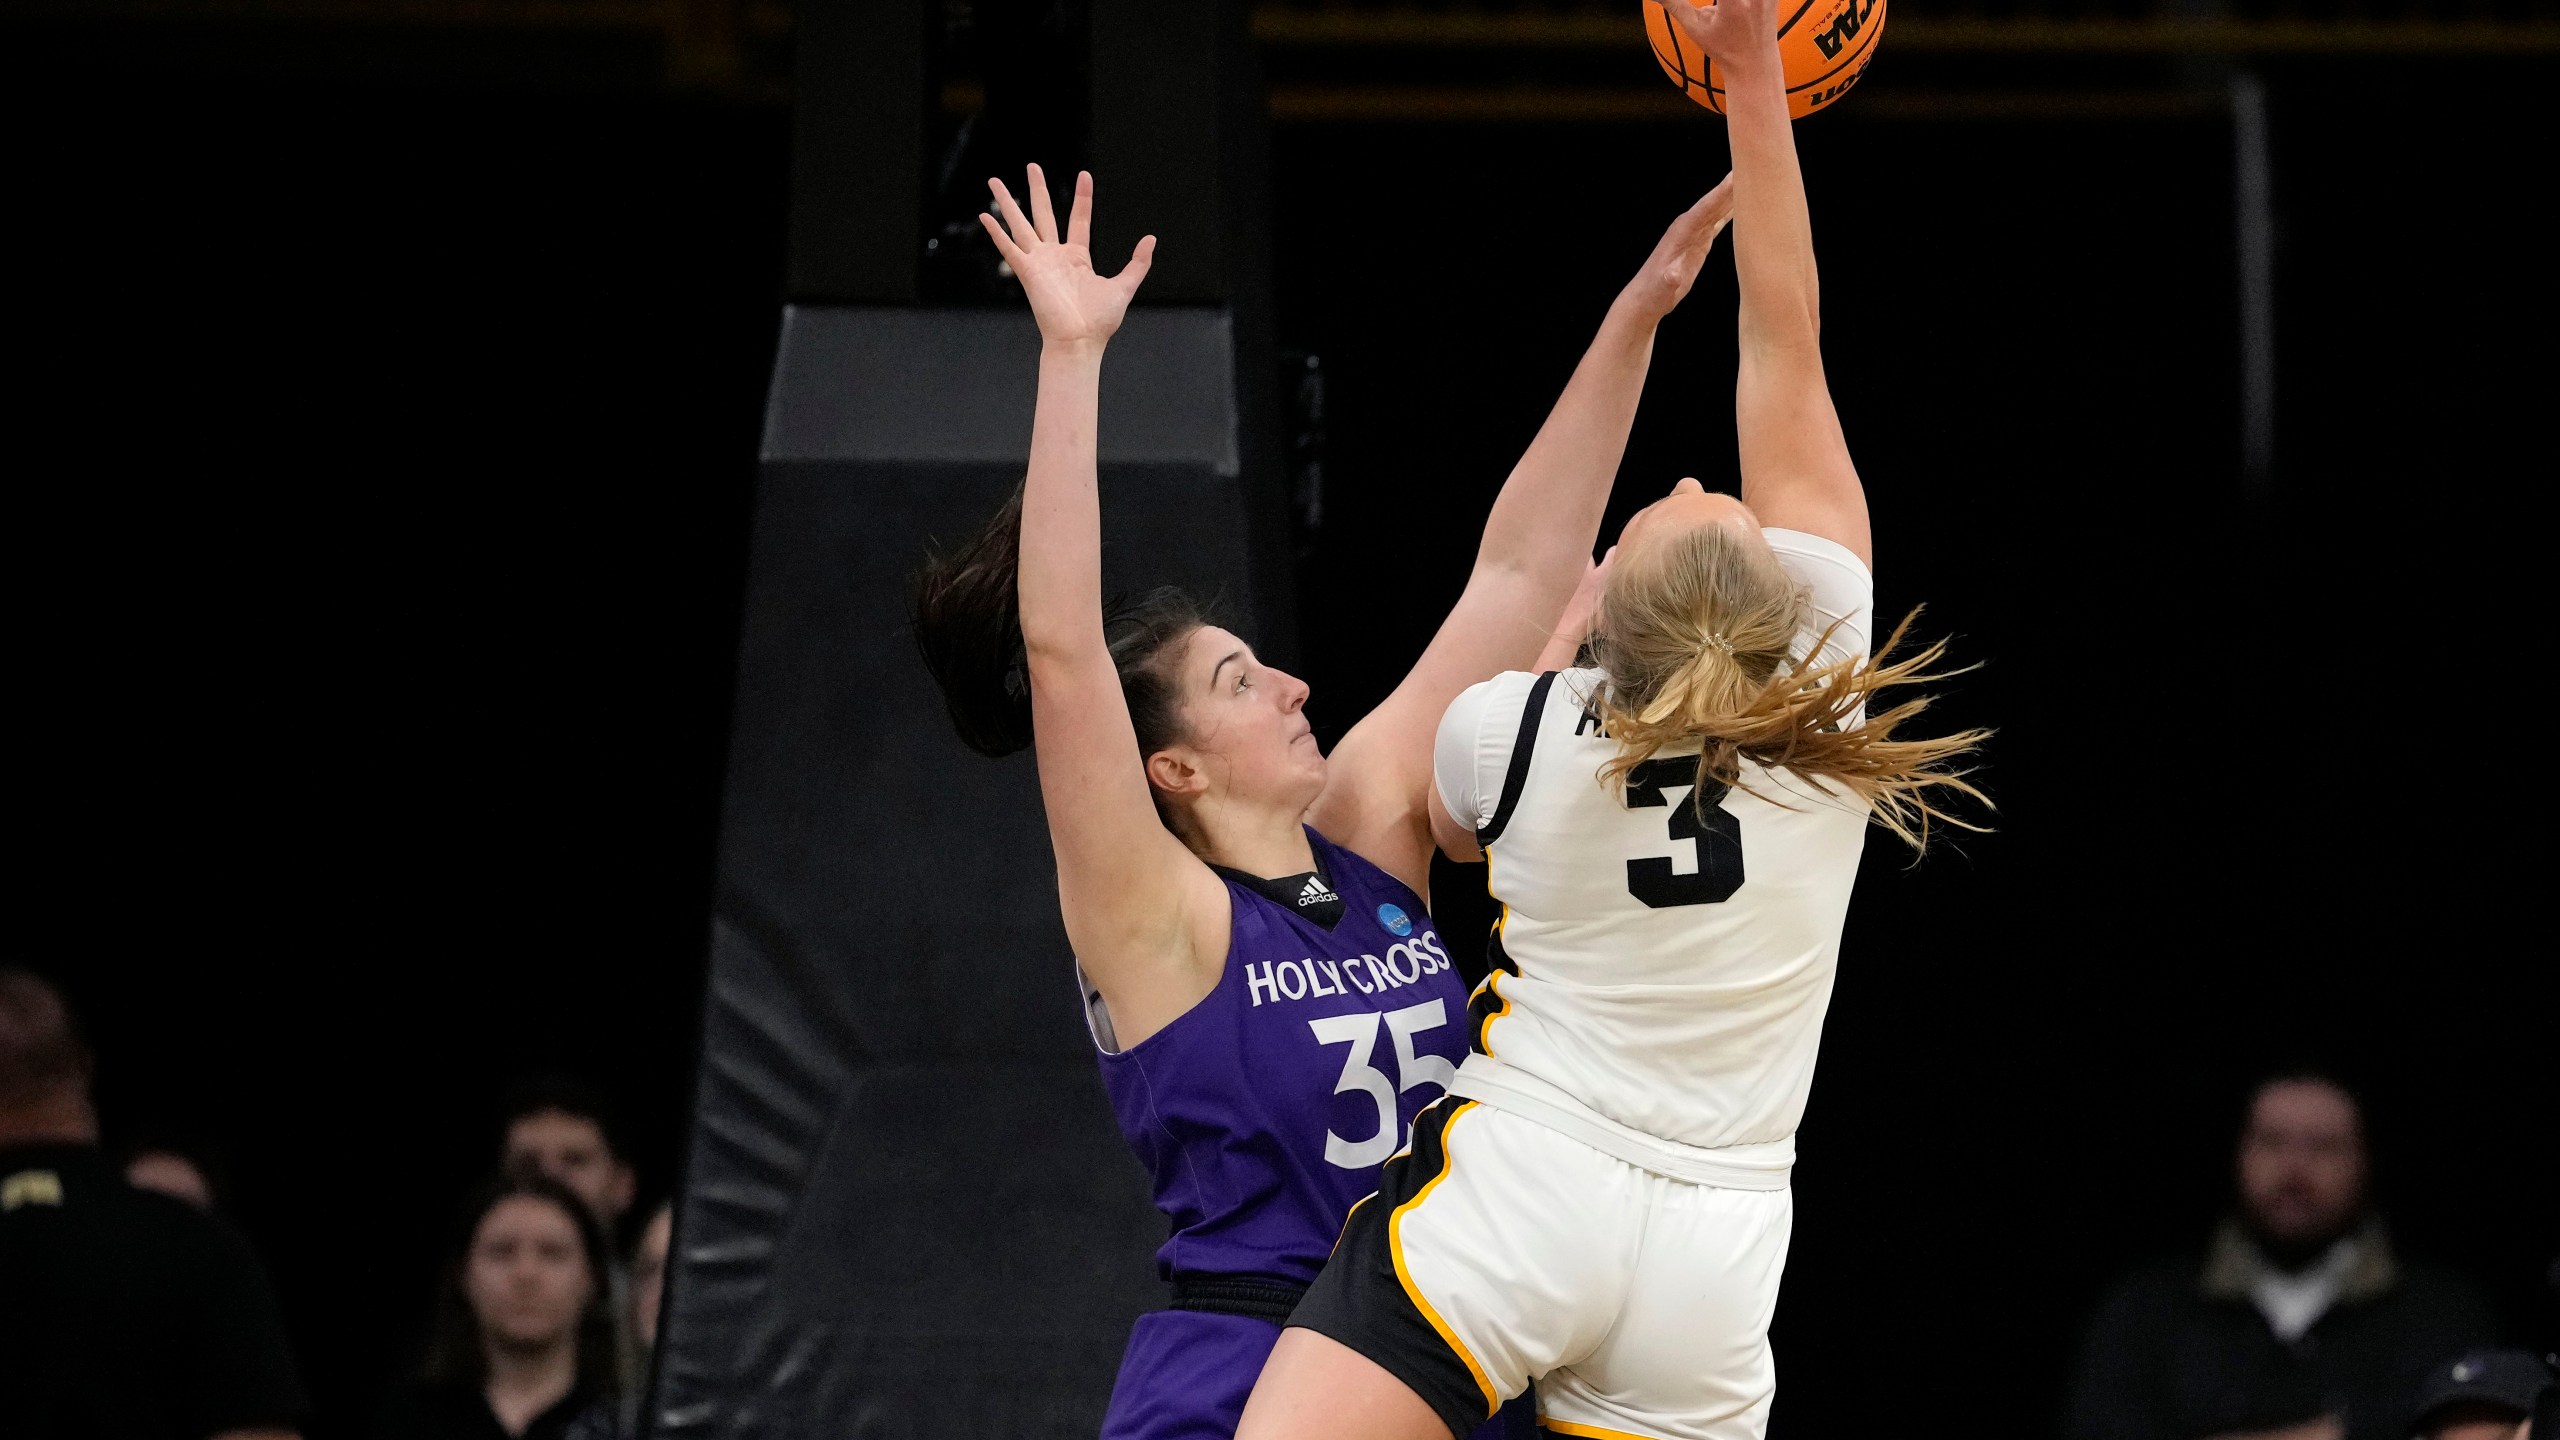 Iowa guard Sydney Affolter (3) shoots a basket as she is fouled by Holy Cross forward Lindsay Berger (35) in the first half of a first-round college basketball game in the NCAA Tournament, Saturday, March 23, 2024, in Iowa City, Iowa. (AP Photo/Matthew Putney)